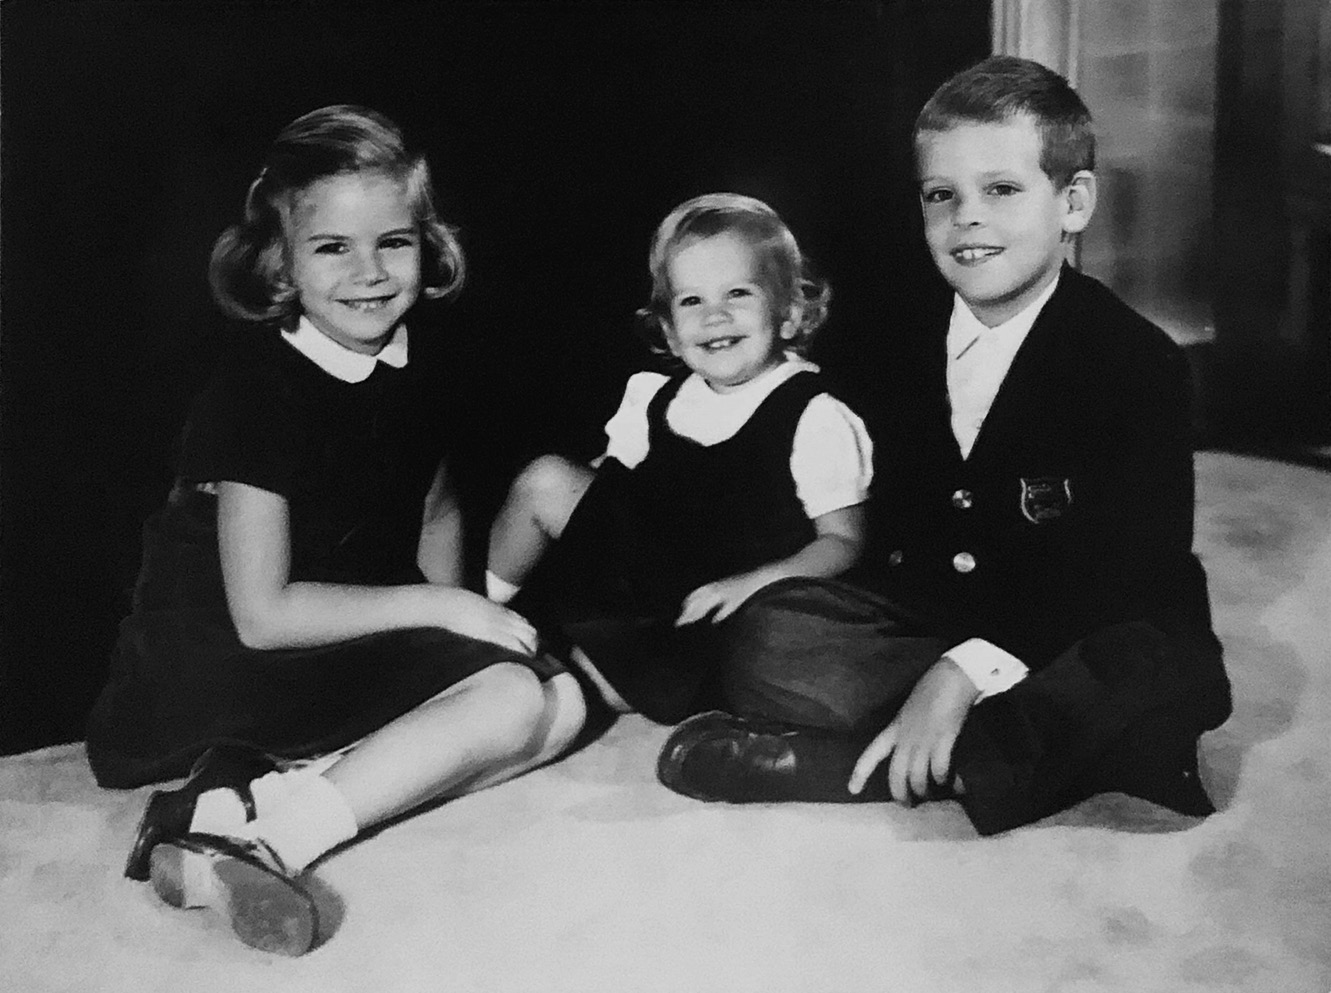  Rocky, age six, seated to the right of sisters Gail and Karey. 